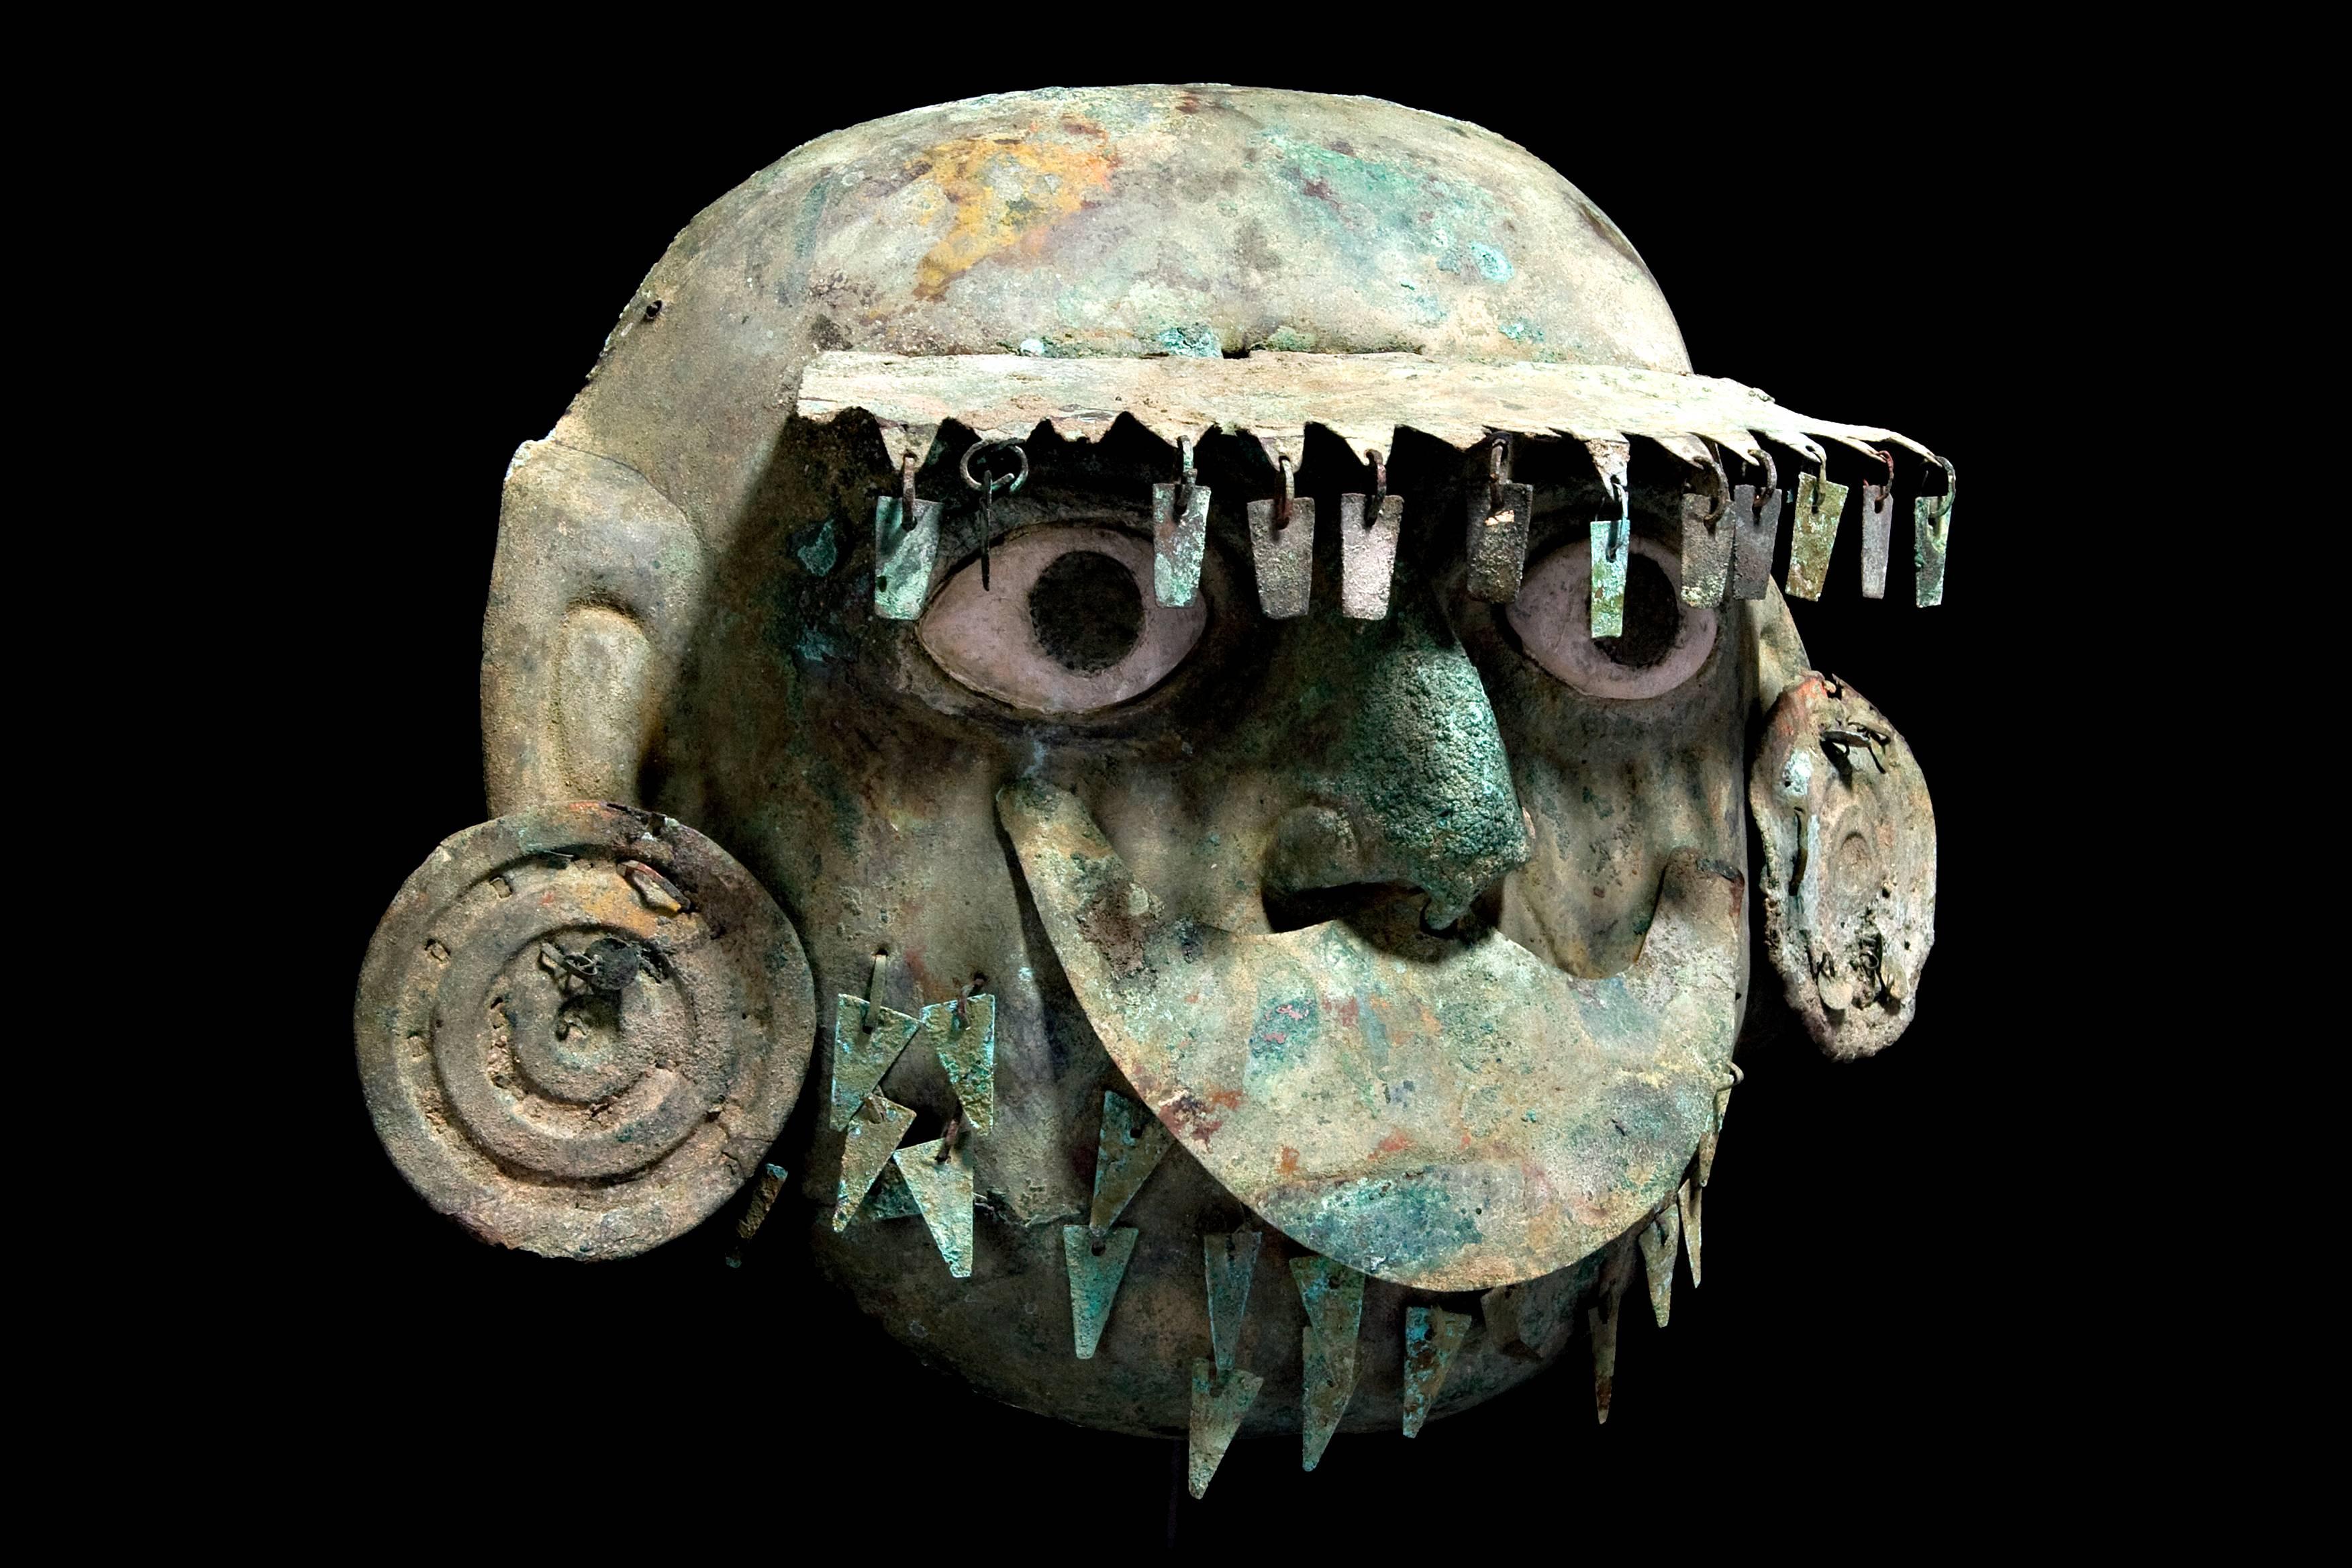 A large coper mask of a dignitary with almond shaped, inset shell eyes with pupils and a wide brim type crown. Attached at the brow line, a row of danglers is suspended, aligning the brow. He is also wearing large, round ear ornaments decorated with